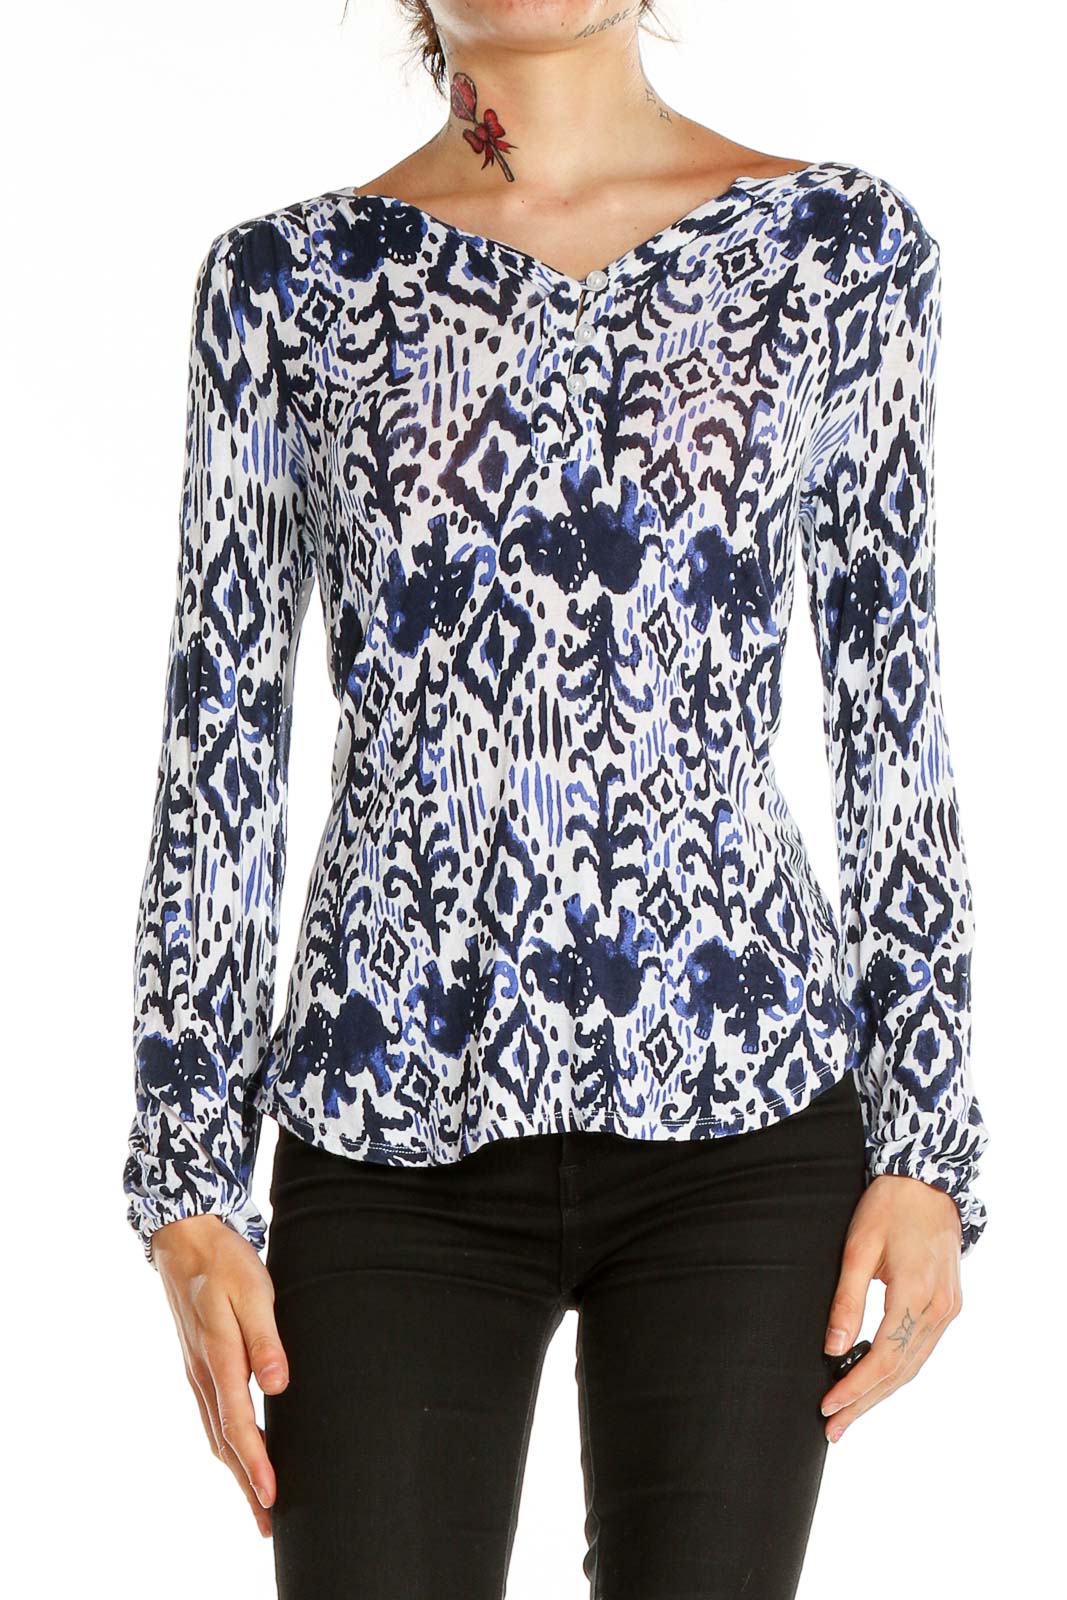 Blue White Printed Casual Shirt Front